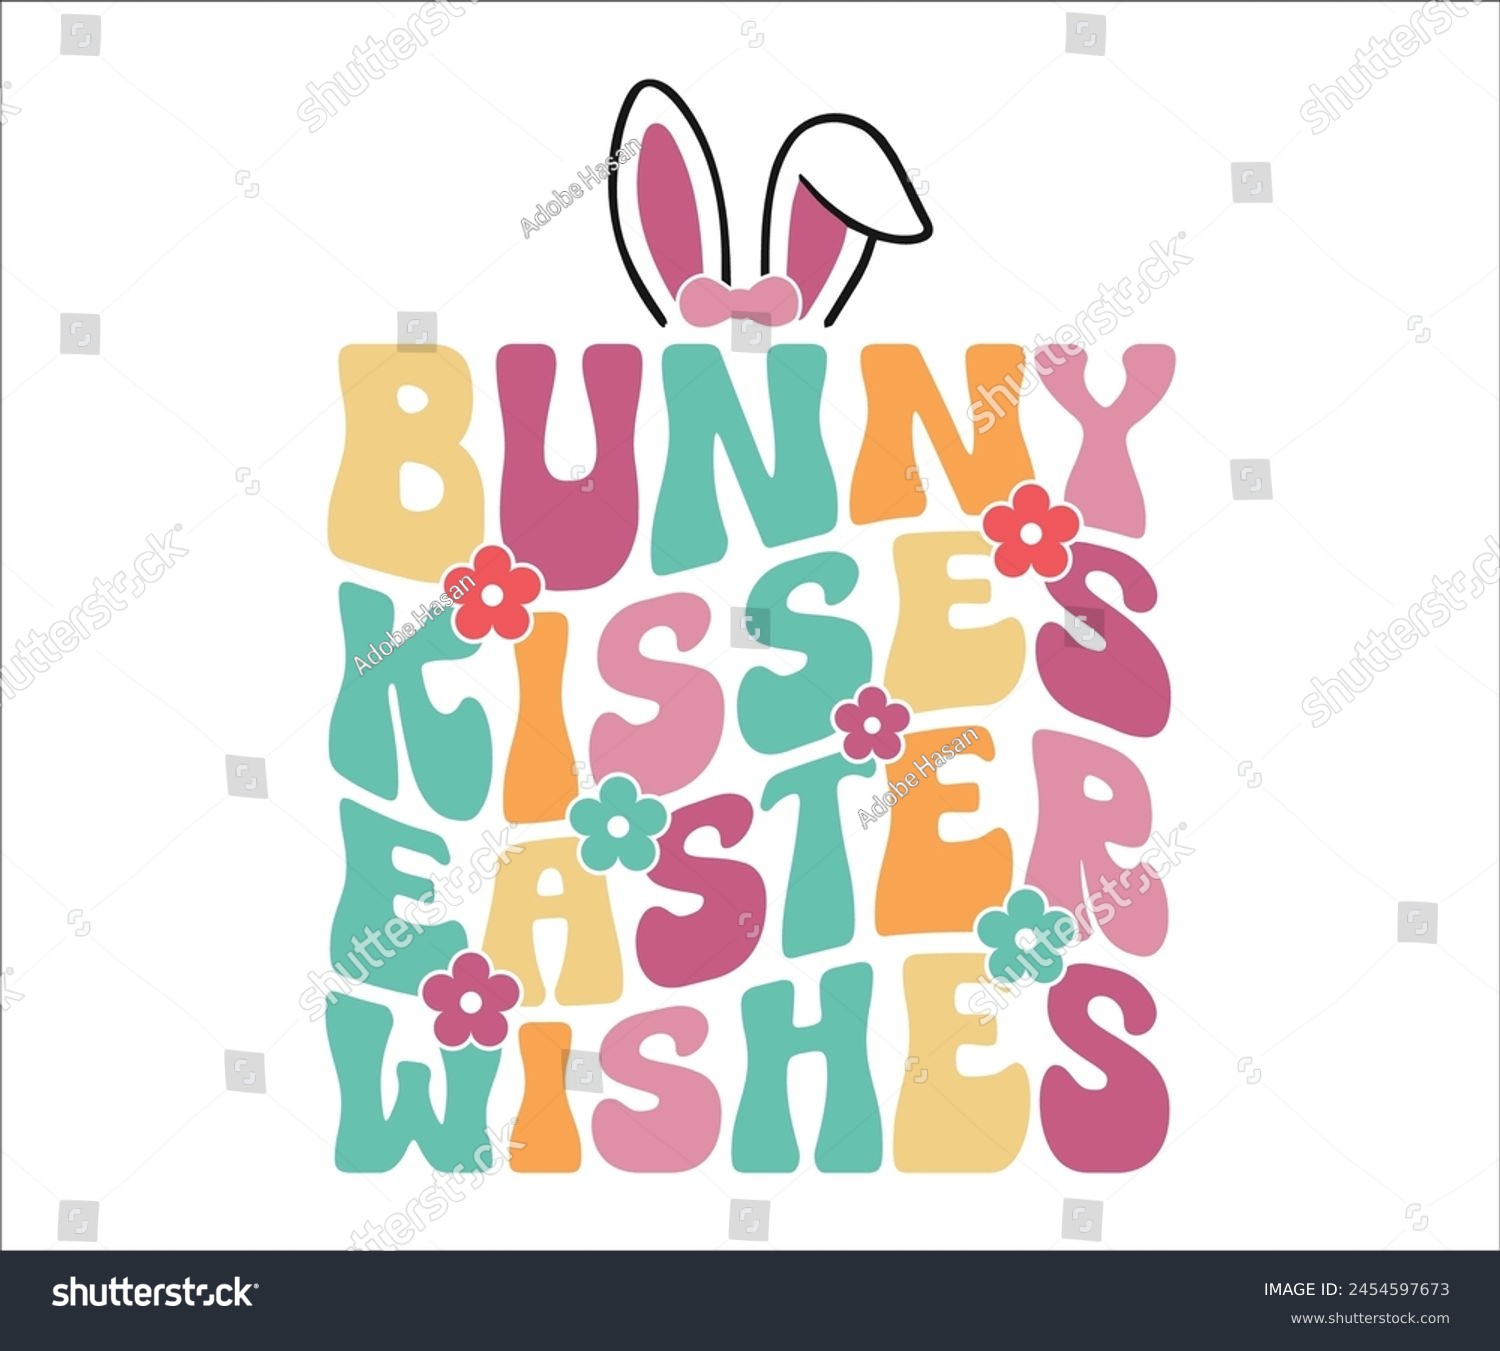 SVG of Bunny kisses Easter Wishes Retro,Groovy,Wavy,Easter Svg,Bunny Svg,Easter Quotes,Easter T-shirt,Cut File svg